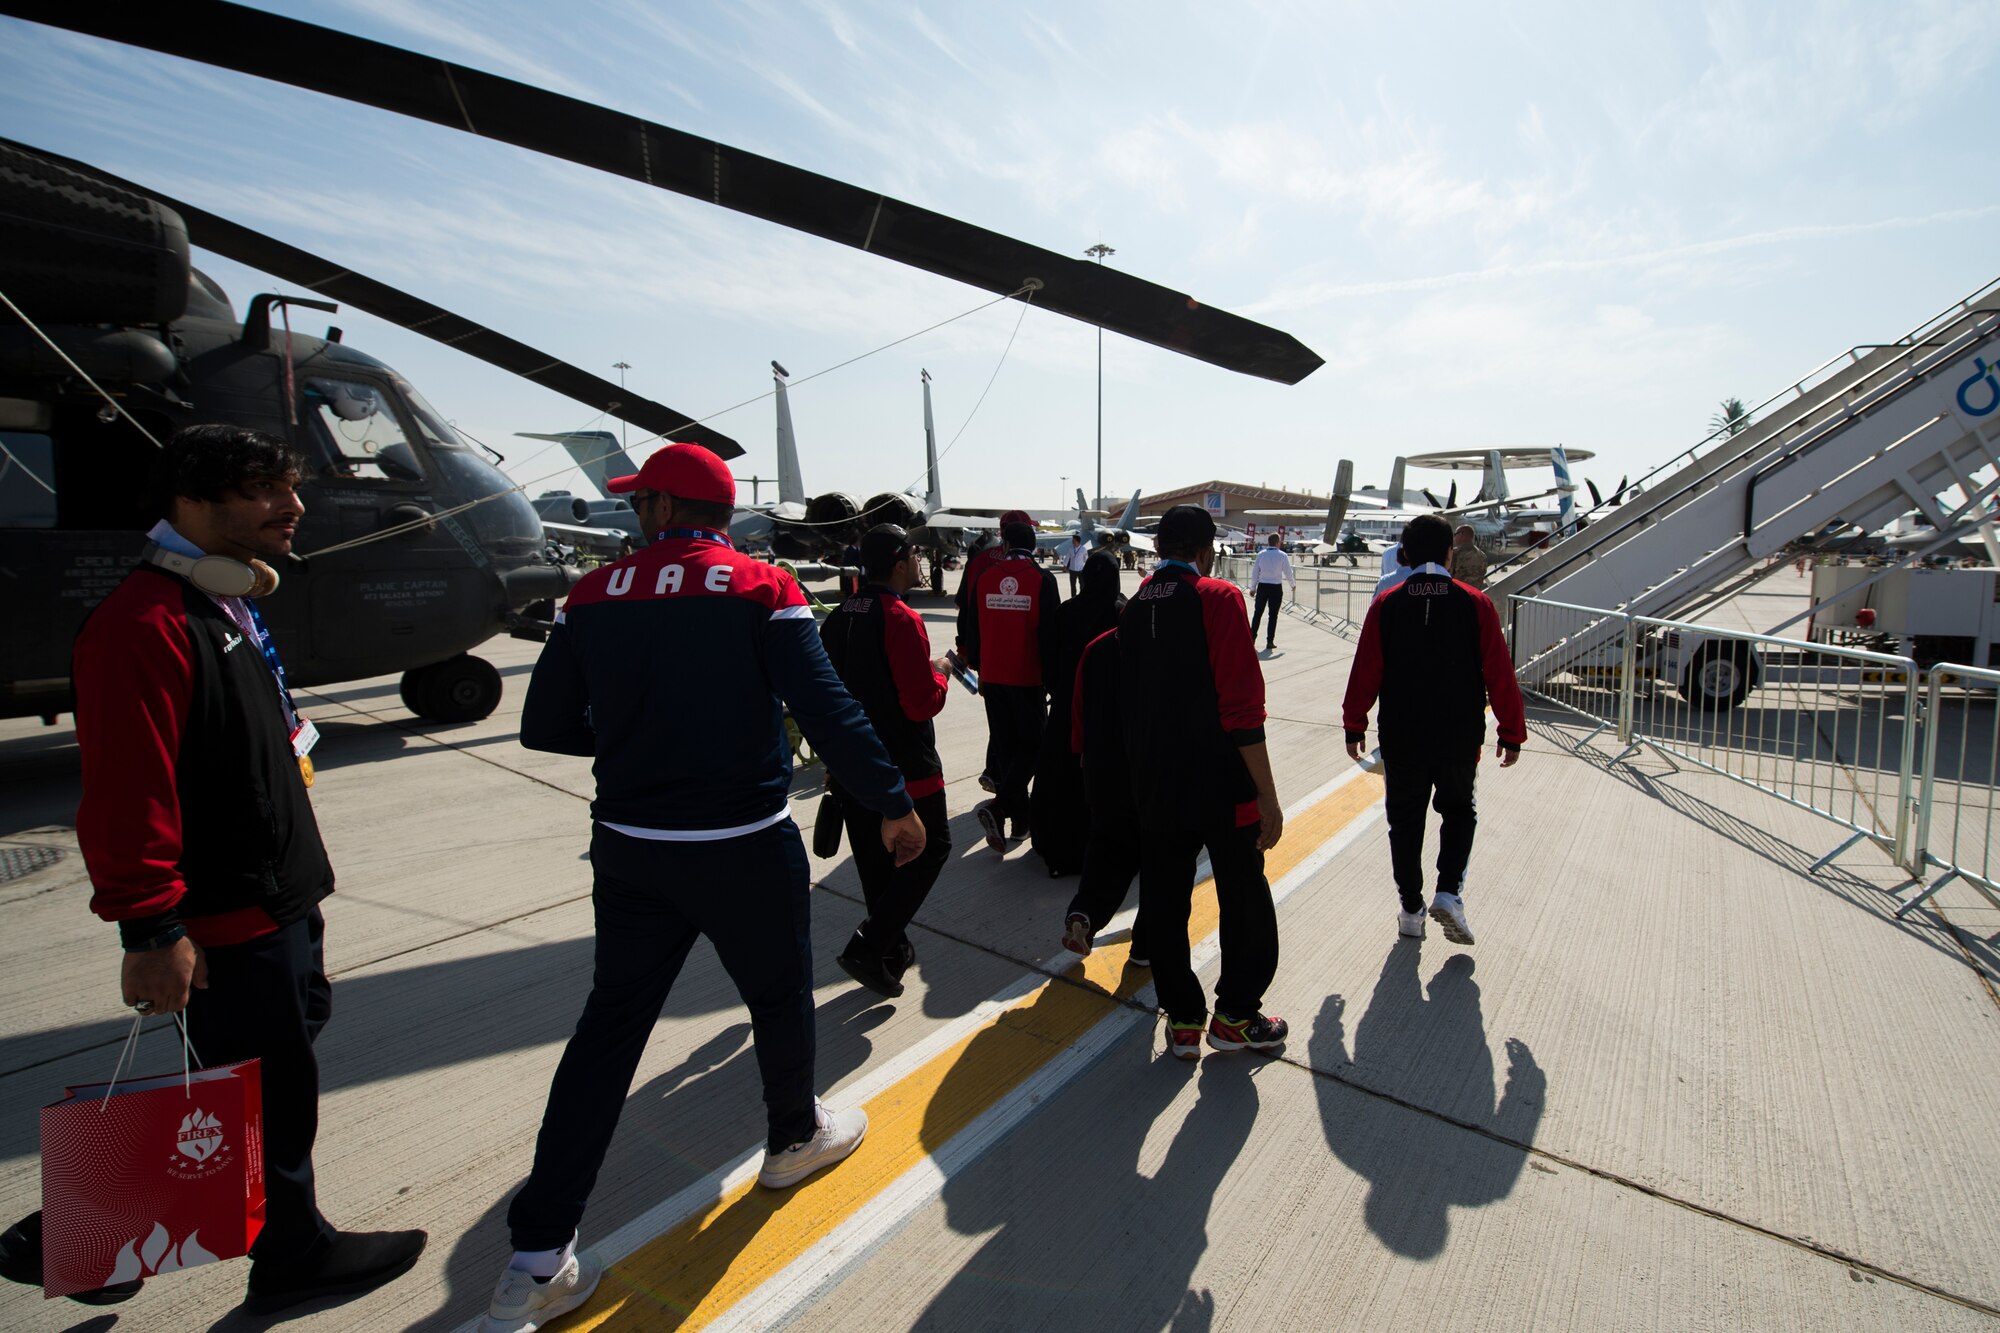 Members of the United Arab Emirates Special Olympics team tour U.S. military aircraft at the Dubai Airshow, United Arab Emirates, Nov. 18, 2019.